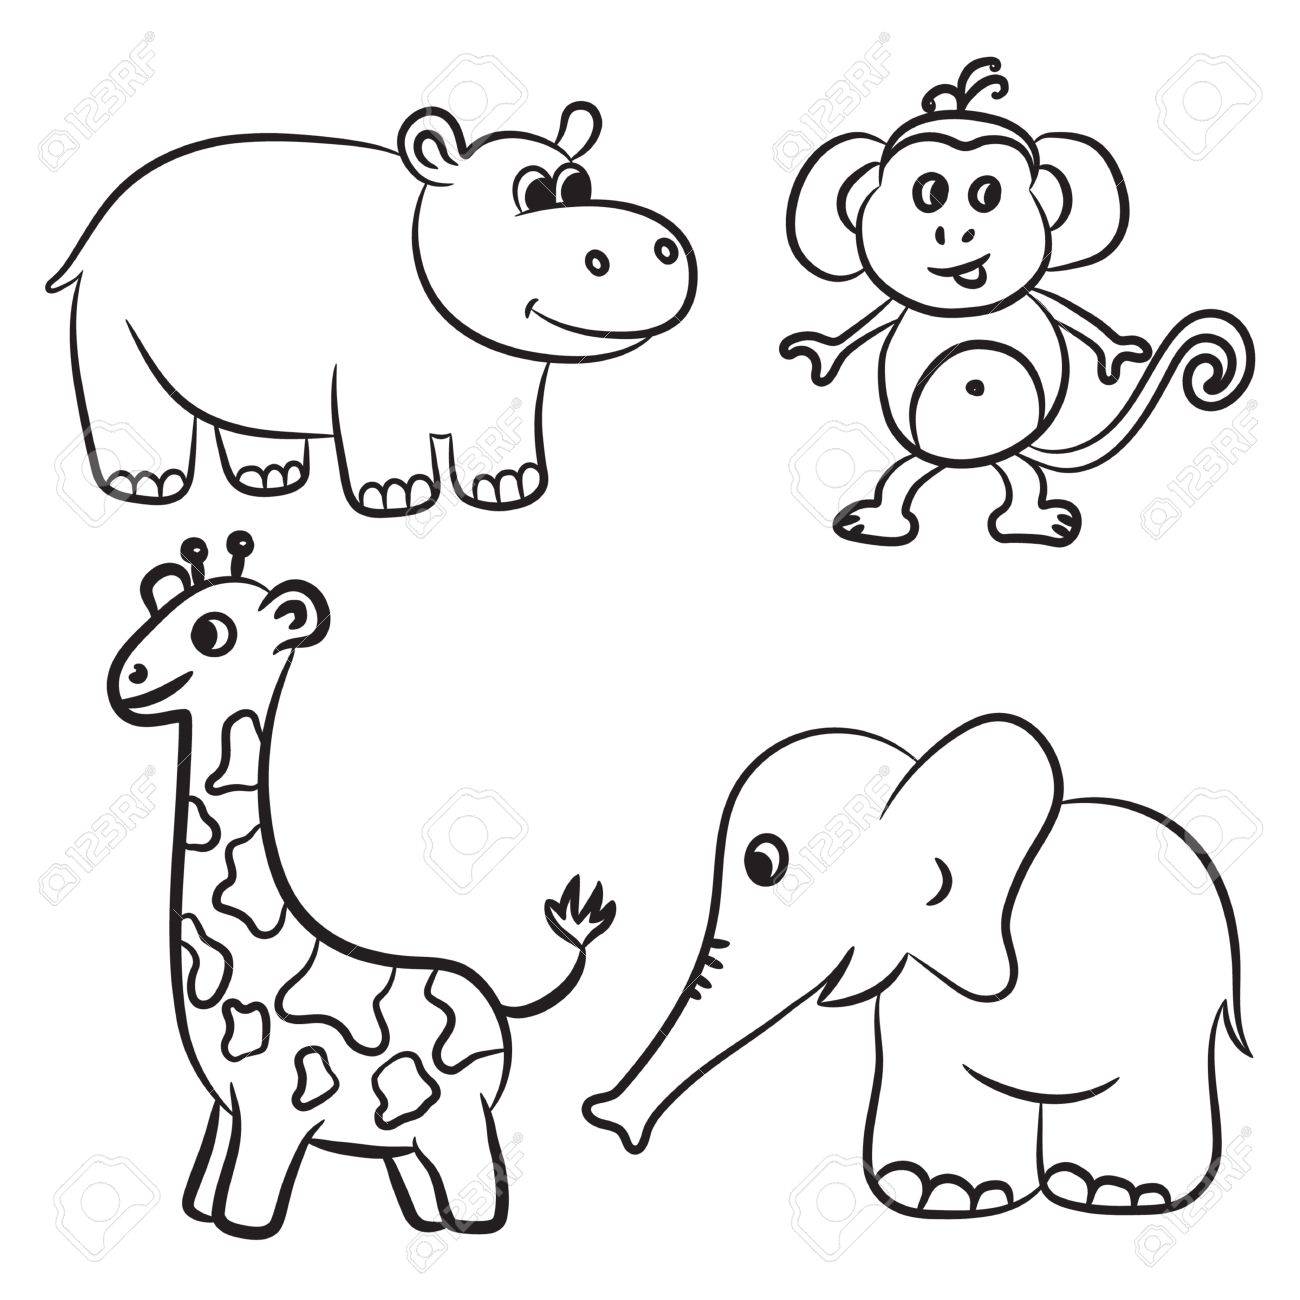 safari zoo animals clipart digital stamps black and white etsy zoo